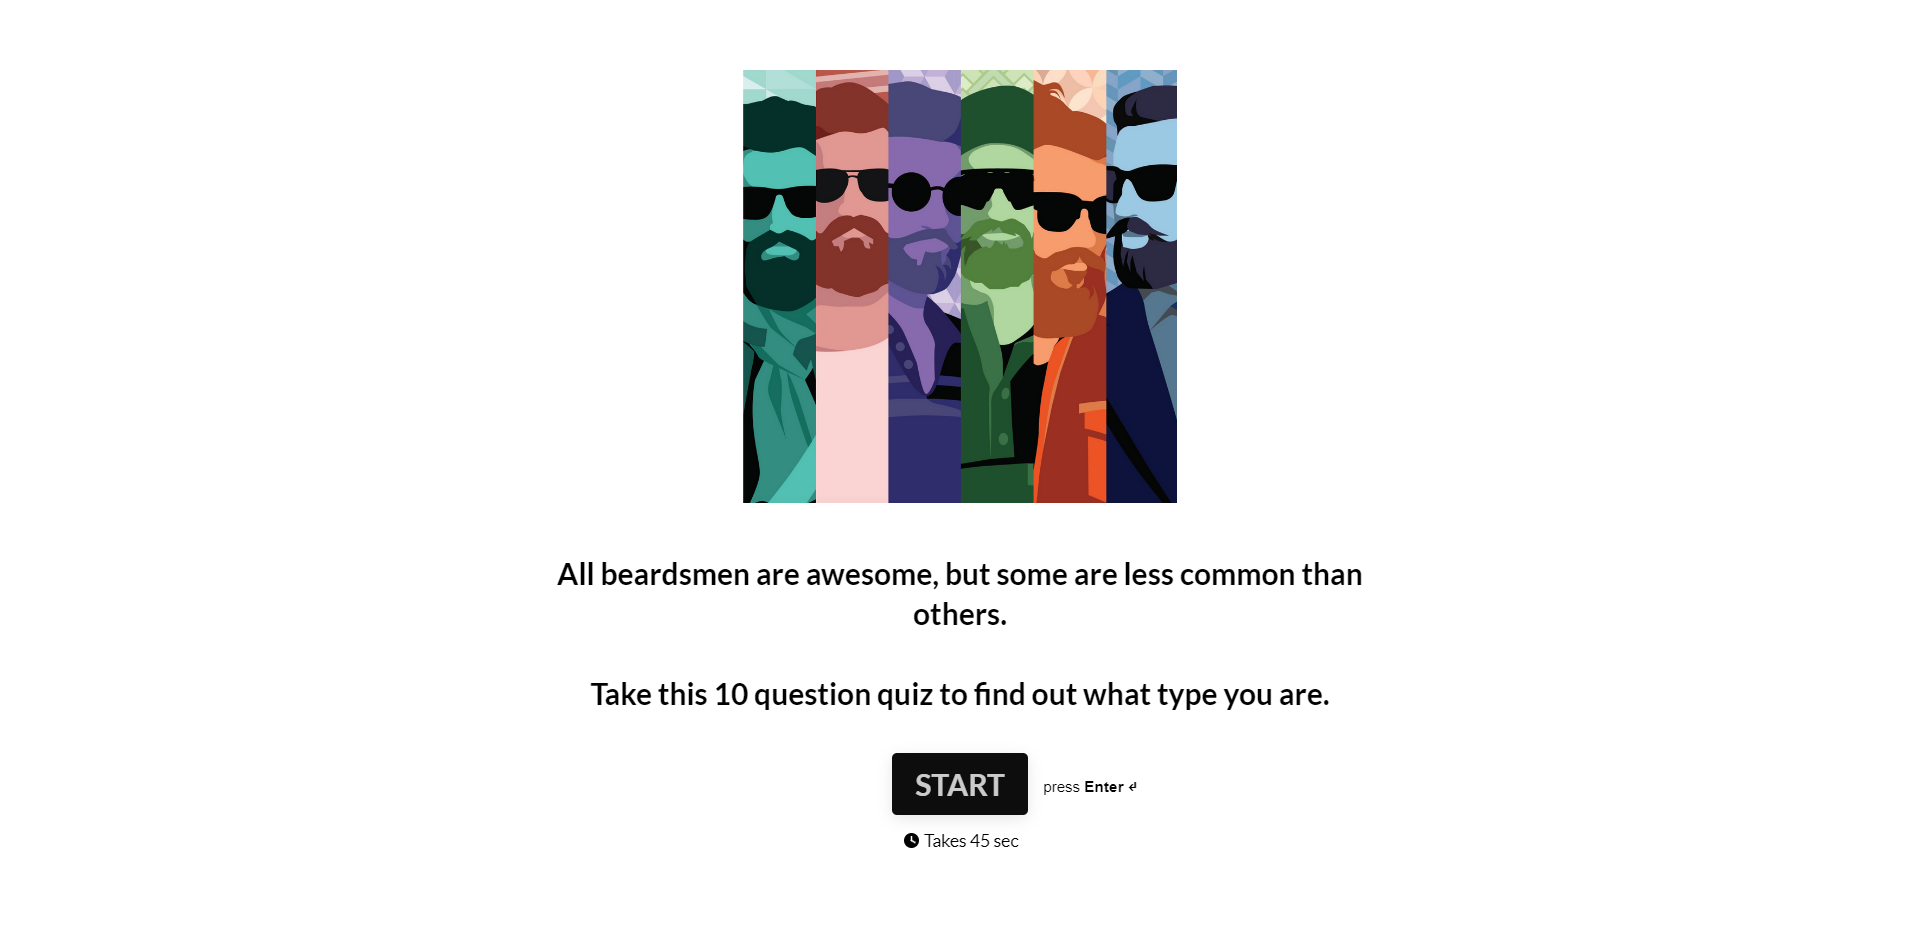 Ecommerce Personalization Tactics–A screenshot from Beardbrand's website of their personalized online quiz. It says, "All beardsmen are awesome, but some are less common than others. Take this 10 question quiz to find out what type you are. Start". 